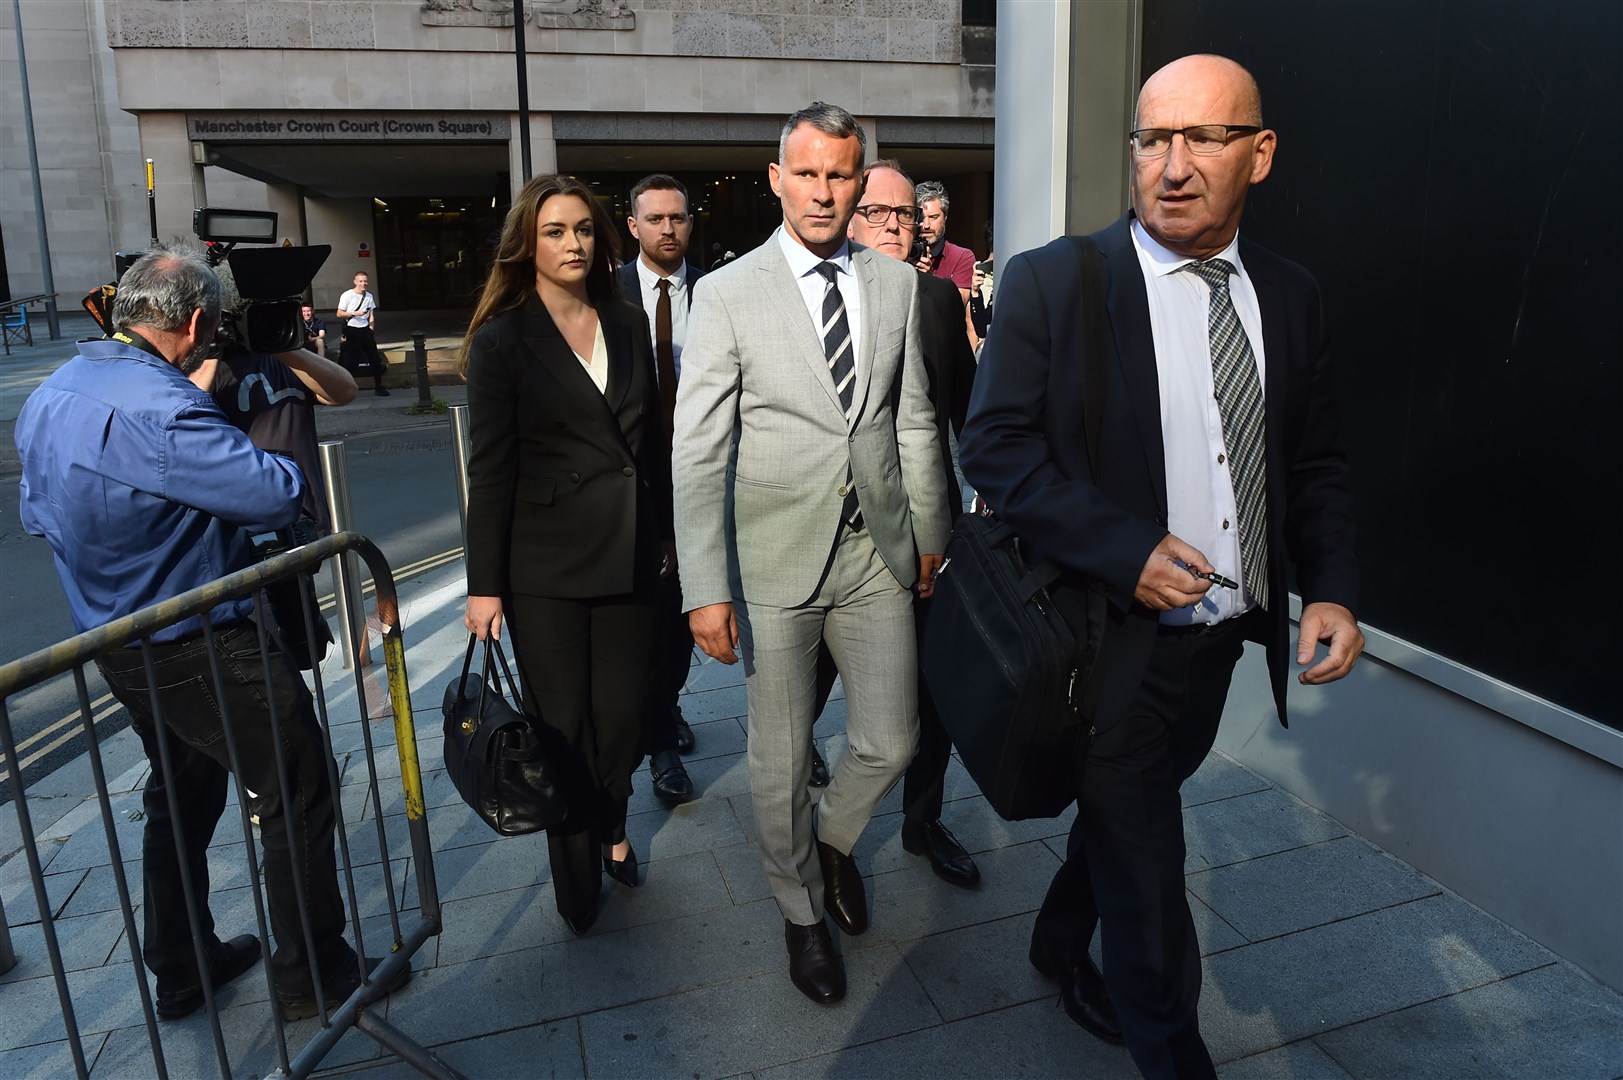 Former Manchester United footballer Ryan Giggs leaving Manchester Crown Court (Peter Powell/PA)